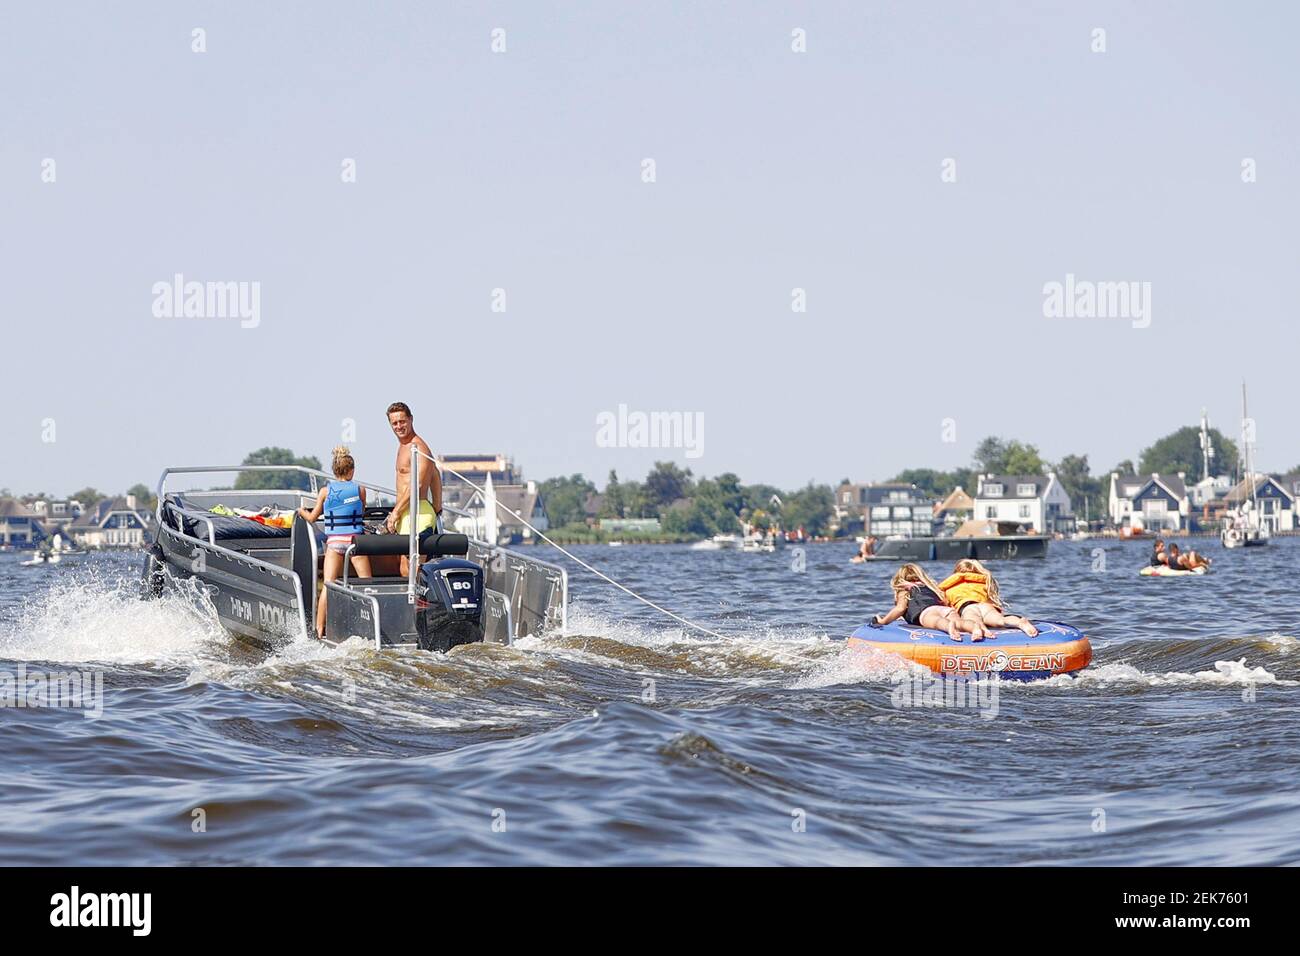 LOOSDRECHT, 26-06-2020 , Summertime on the lakes of Holland where temperatures reached 30 degrees Celsius. Many people enjoy their freedom after a long period of lockdown due to the coronacrisis. De Loosdrechtse plassen tijdens een warme zomerdag. Vlinder achter de boot (Photo by Pro Shots/Sipa USA) Stock Photo